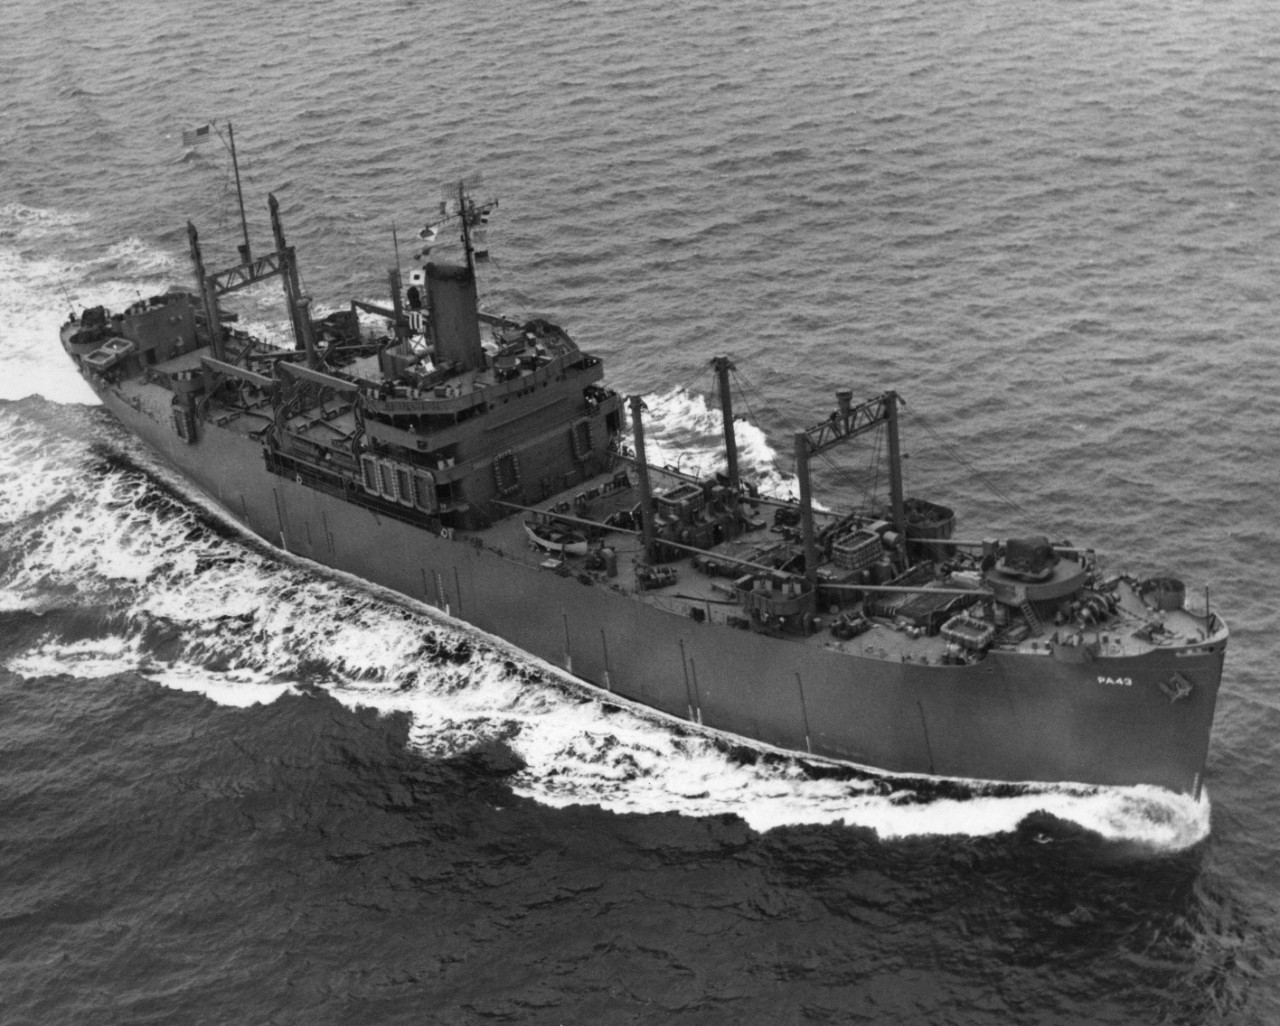 USS Fayette (APA-43) underway in the New York Harbor area. Note that none of her boats have been embarked. Photo taken by a plane from Naval Air Station New York, from an altitude of 400 feet.